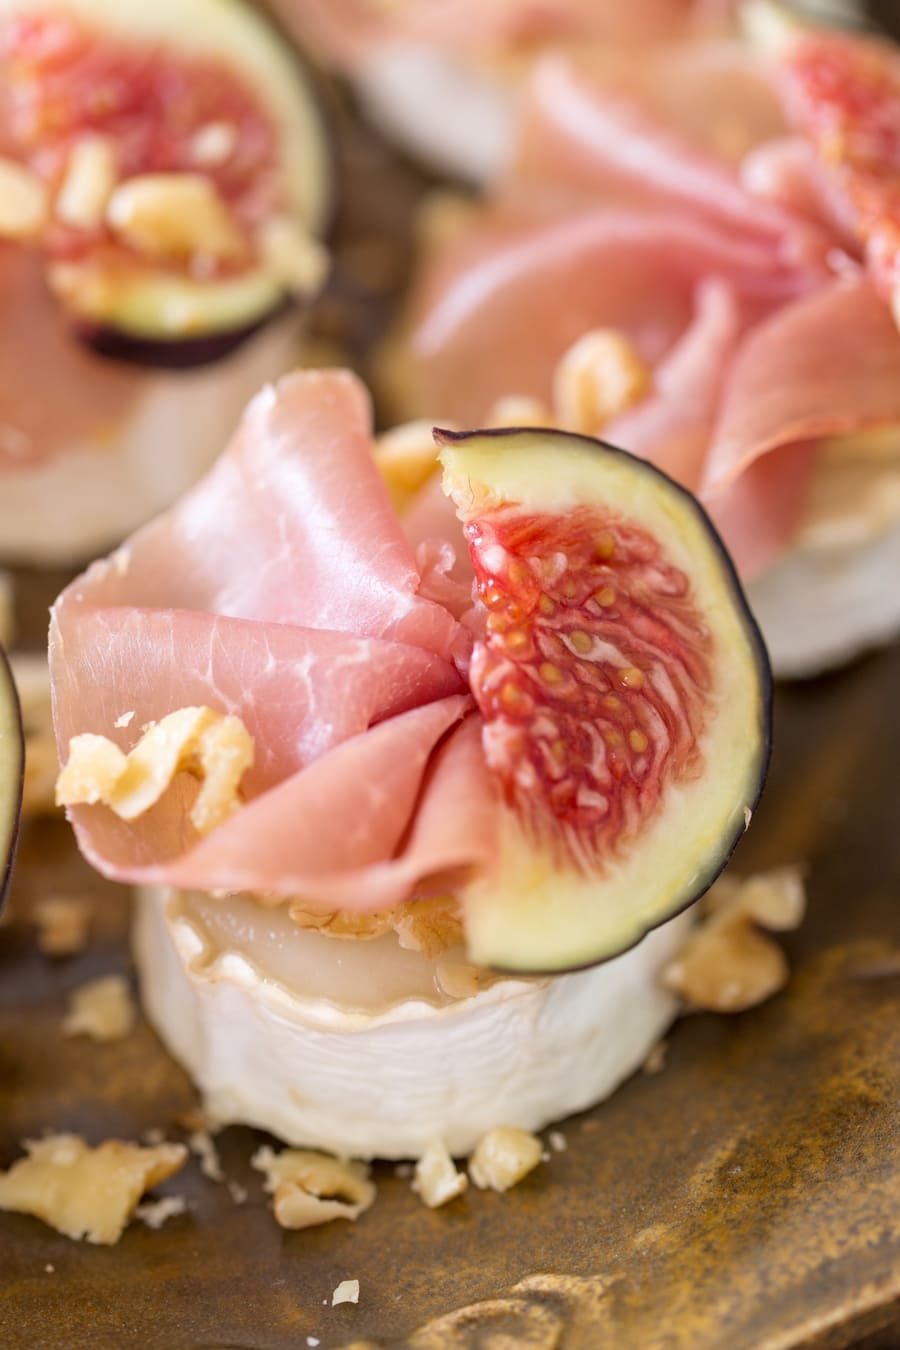 Baked chevre bits with figs and prosciutto.